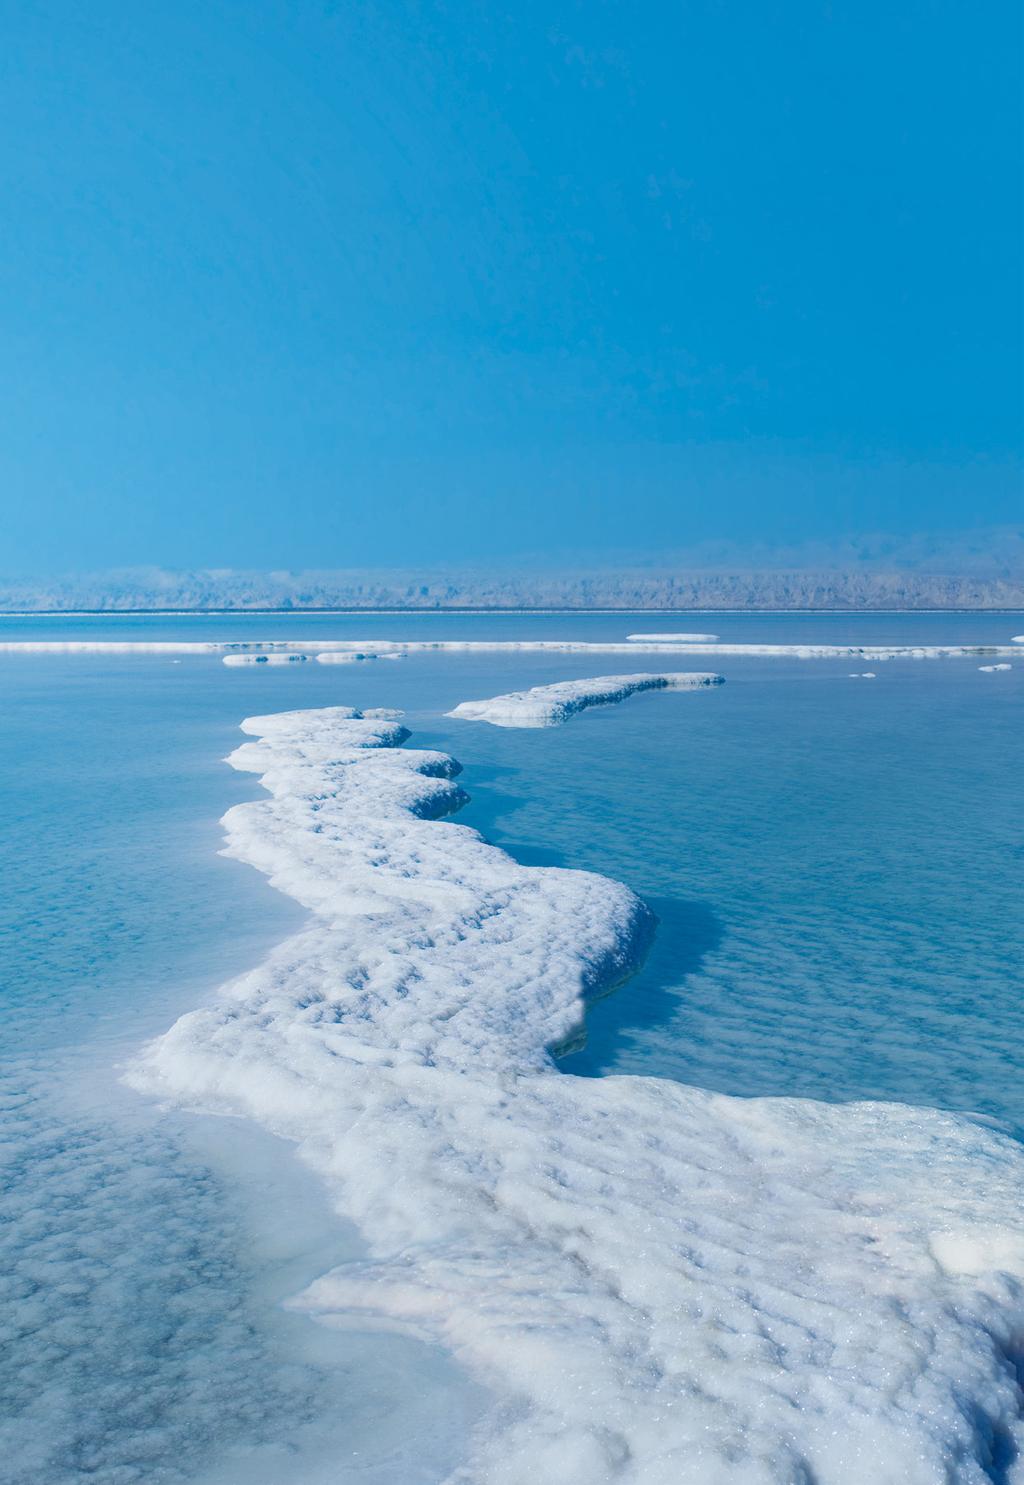 THE DEAD SEA The true secret to our success lies in the mineral-rich Dead Sea. As the lowest point on earth, 1,388 feet below sea level, it is one of the world s most saline bodies of water.